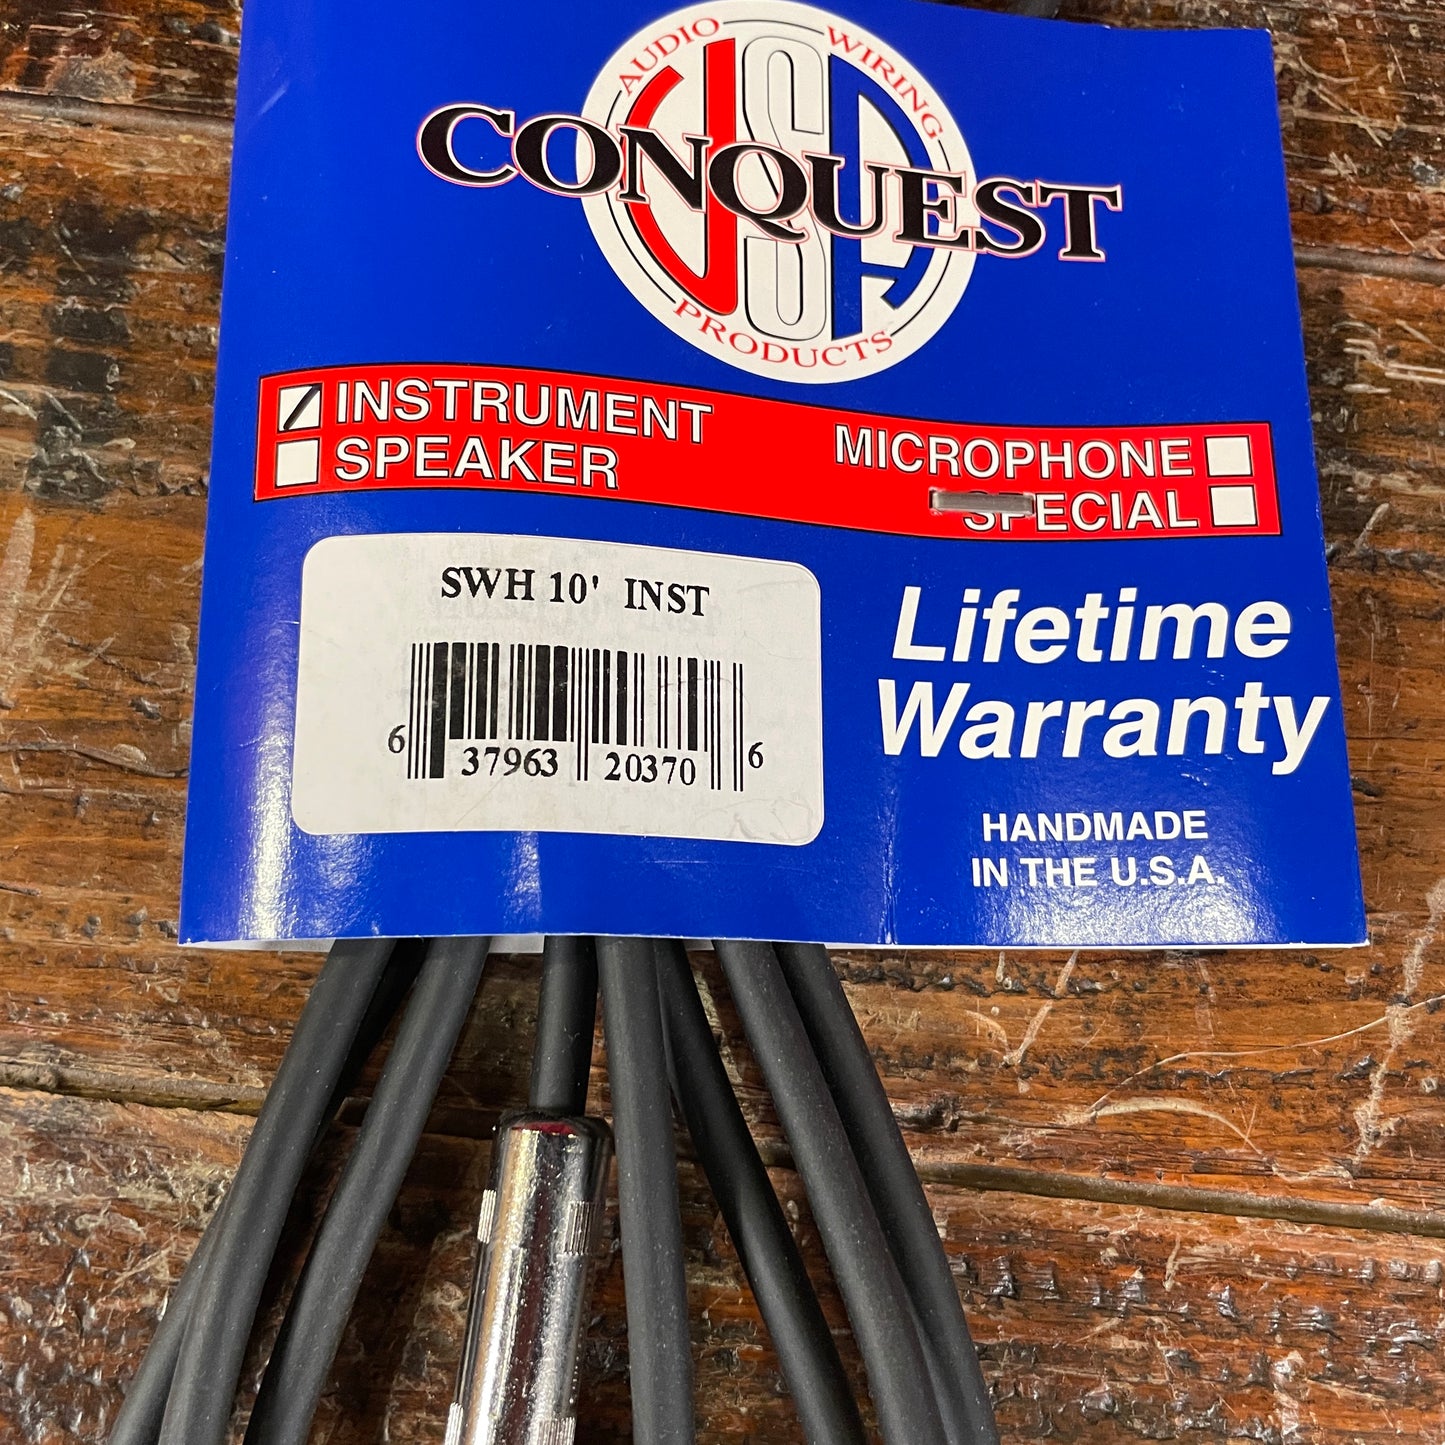 Conquest 10ft SWH10 Guitar/Instrument Cable